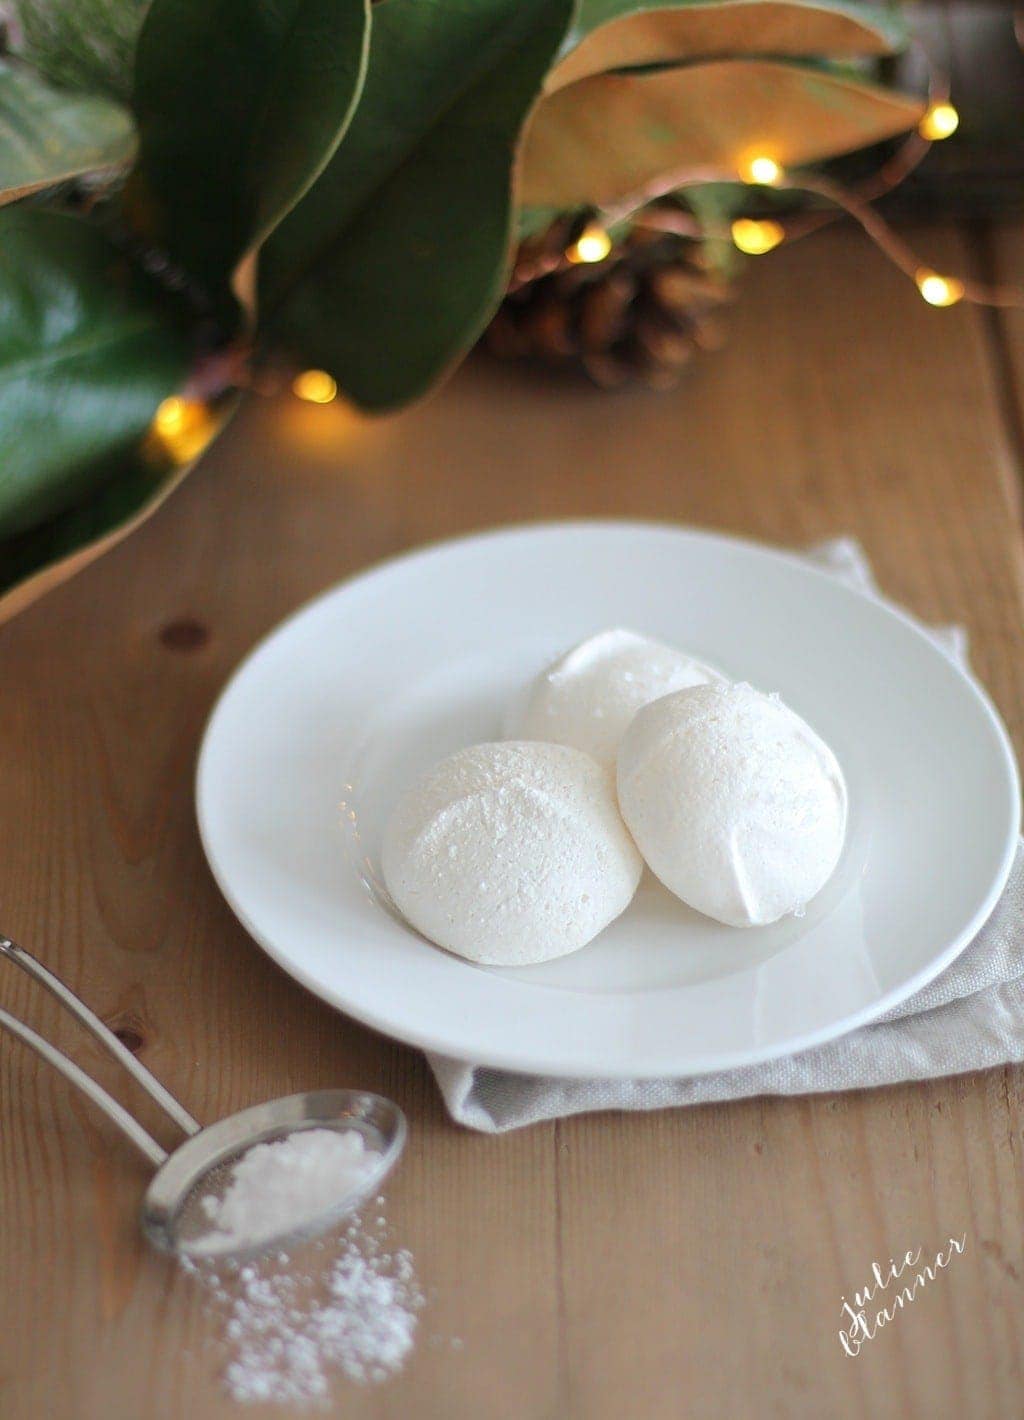 Snowball cookie recipe - a beautiful, crunchy cookie at just 30 calories each!